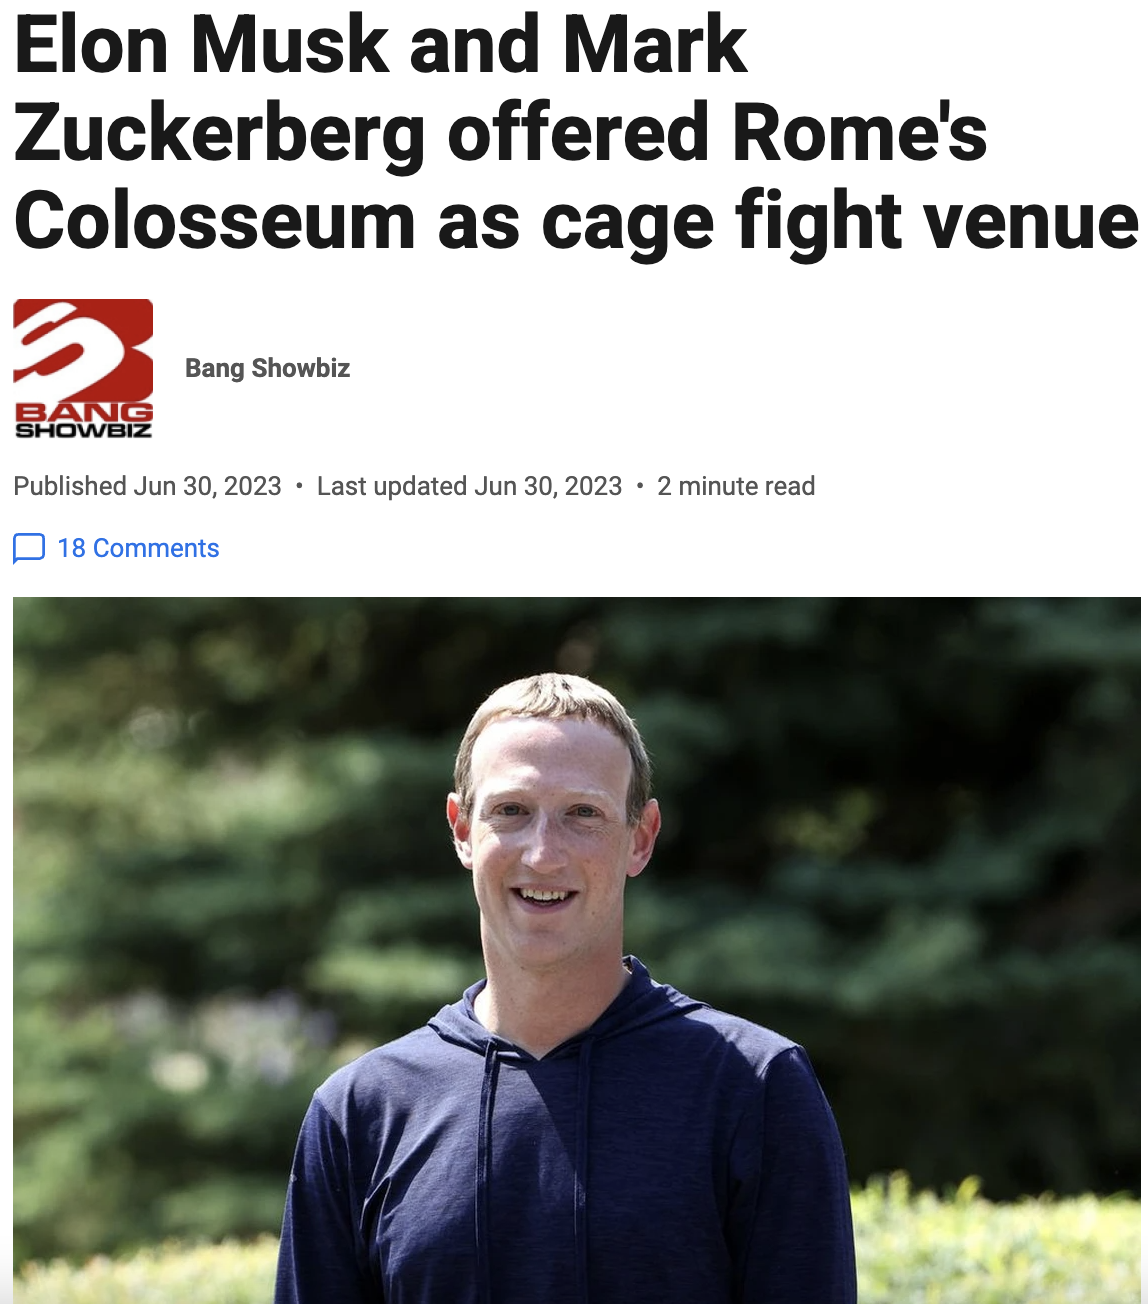 mark zuckerberg - Elon Musk and Mark offered Rome's Zuckerberg Colosseum as cage fight venue 5 Bang Showbiz Published Last updated . 2 minute read 18 Bang Showbiz